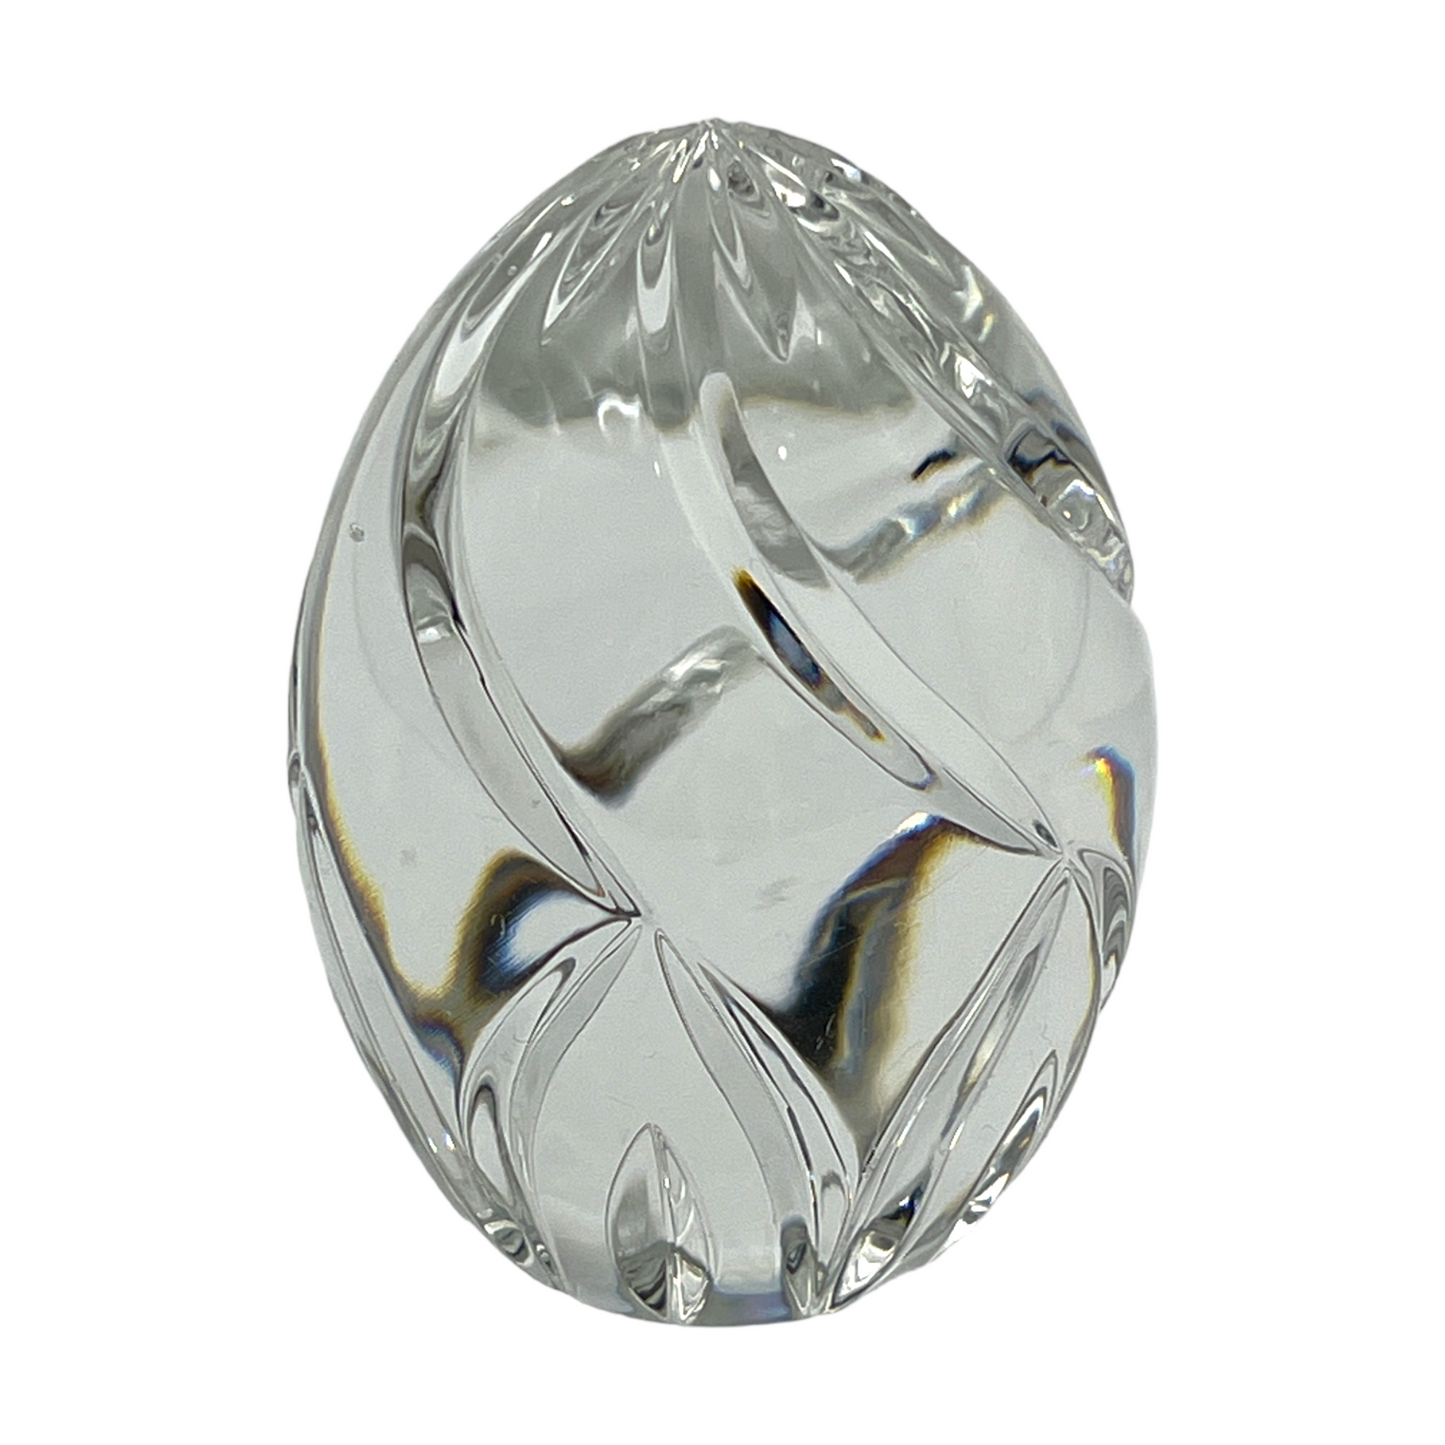 Ethereal Elegance: Crystal Egg Shaped Art Glass Paperweight - 3.25"